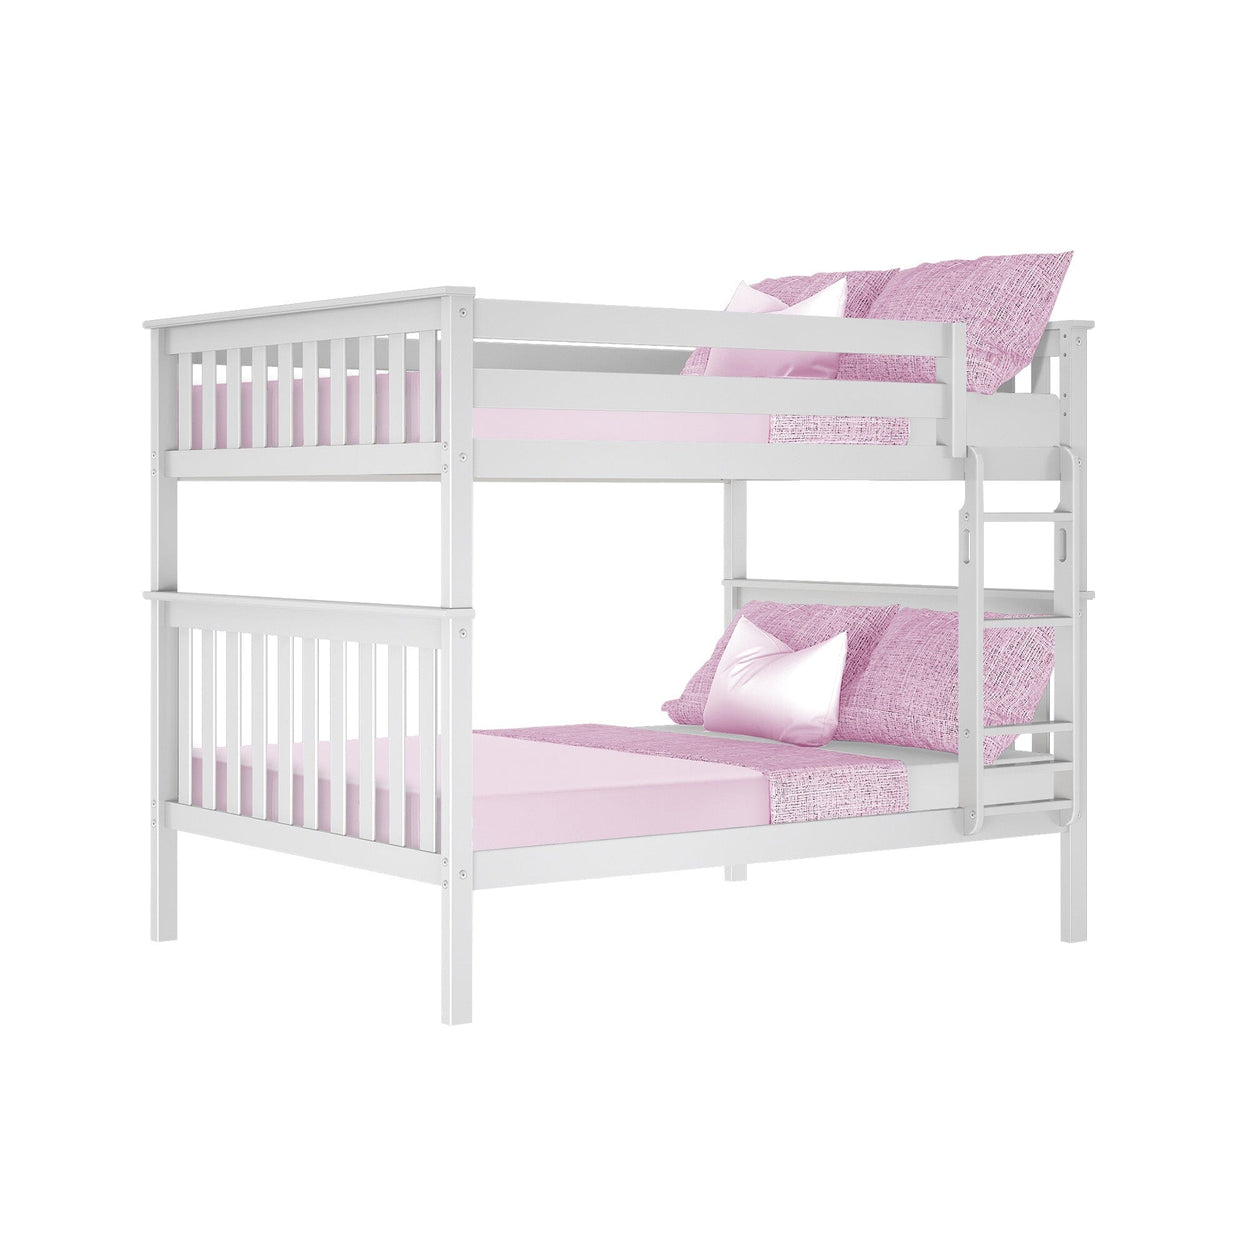 180251-002 : Bunk Beds Full over Full Bunk Bed, White